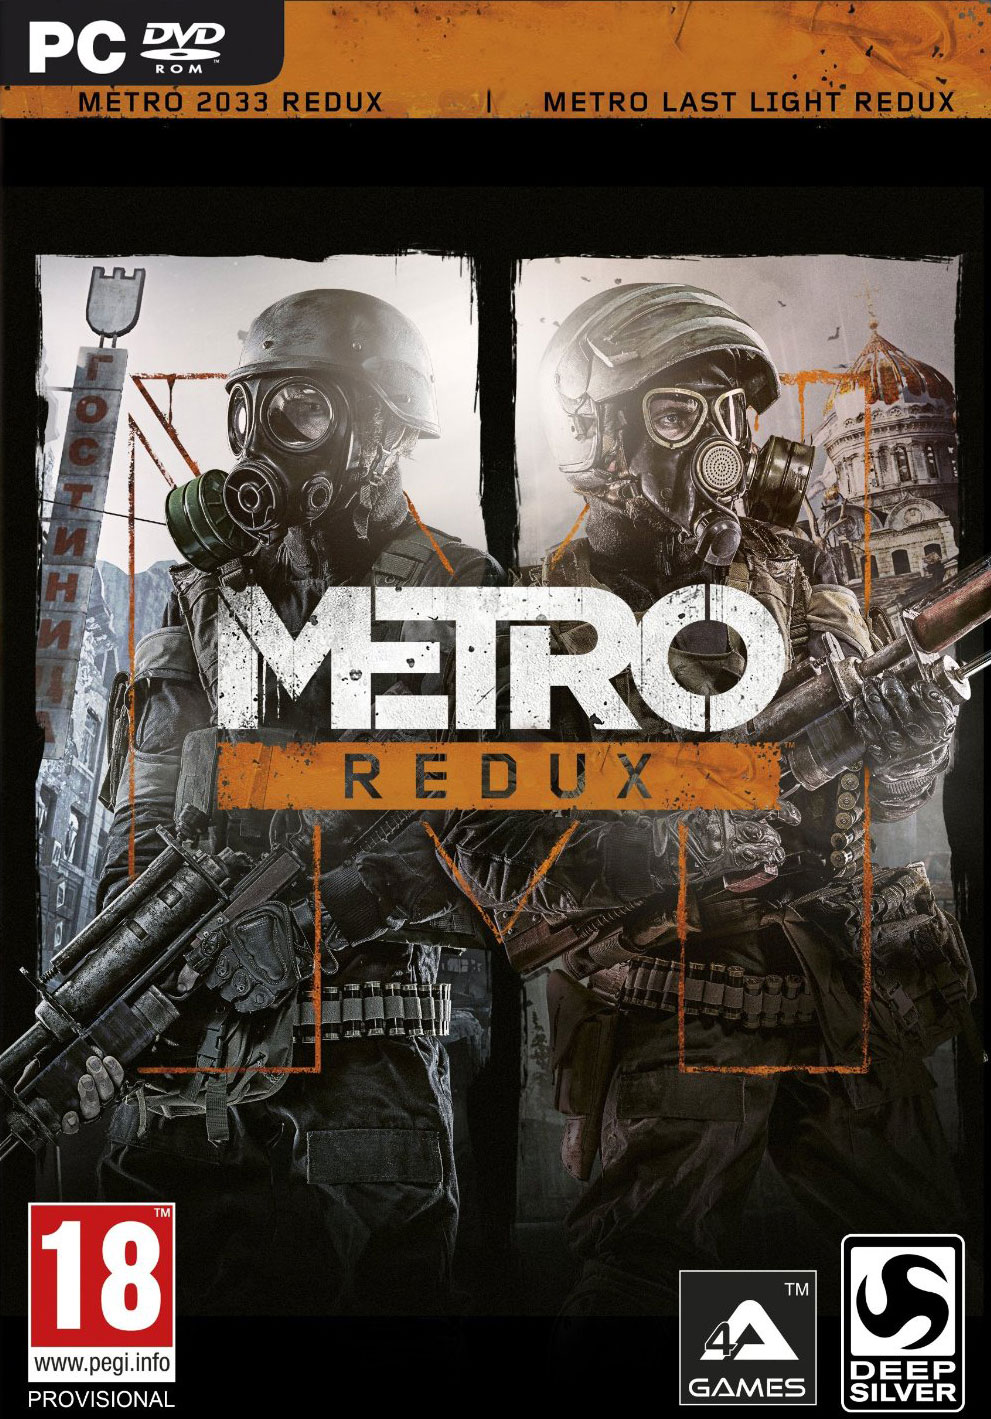 https://rozup.ir/up/narsis3/Pictures/Metro-2033-Redux-pc-cover-large.jpg